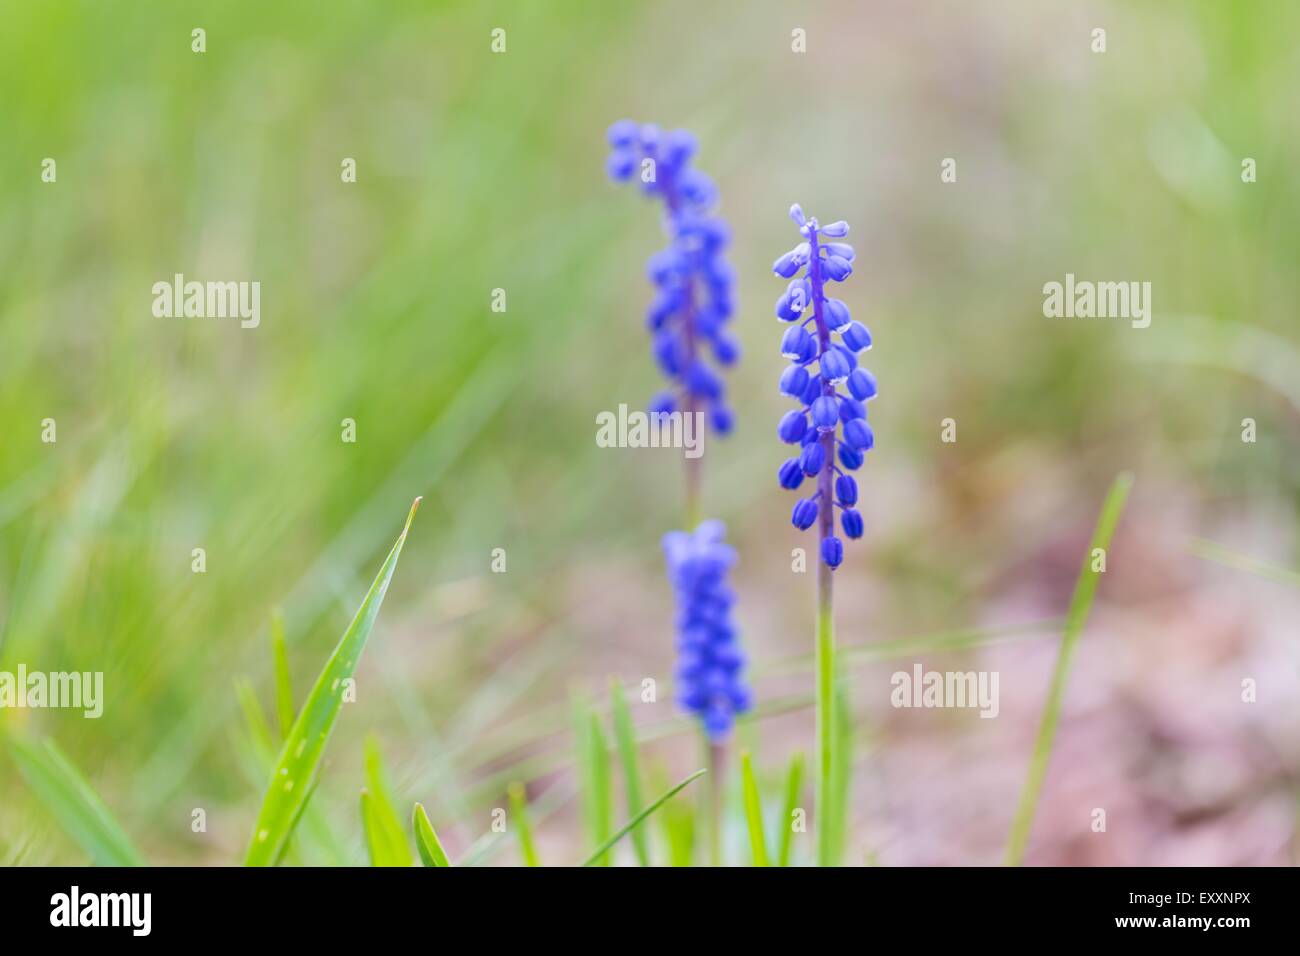 Blooming grape hyacinth flowers. Close up of springtime blue flowers Stock Photo